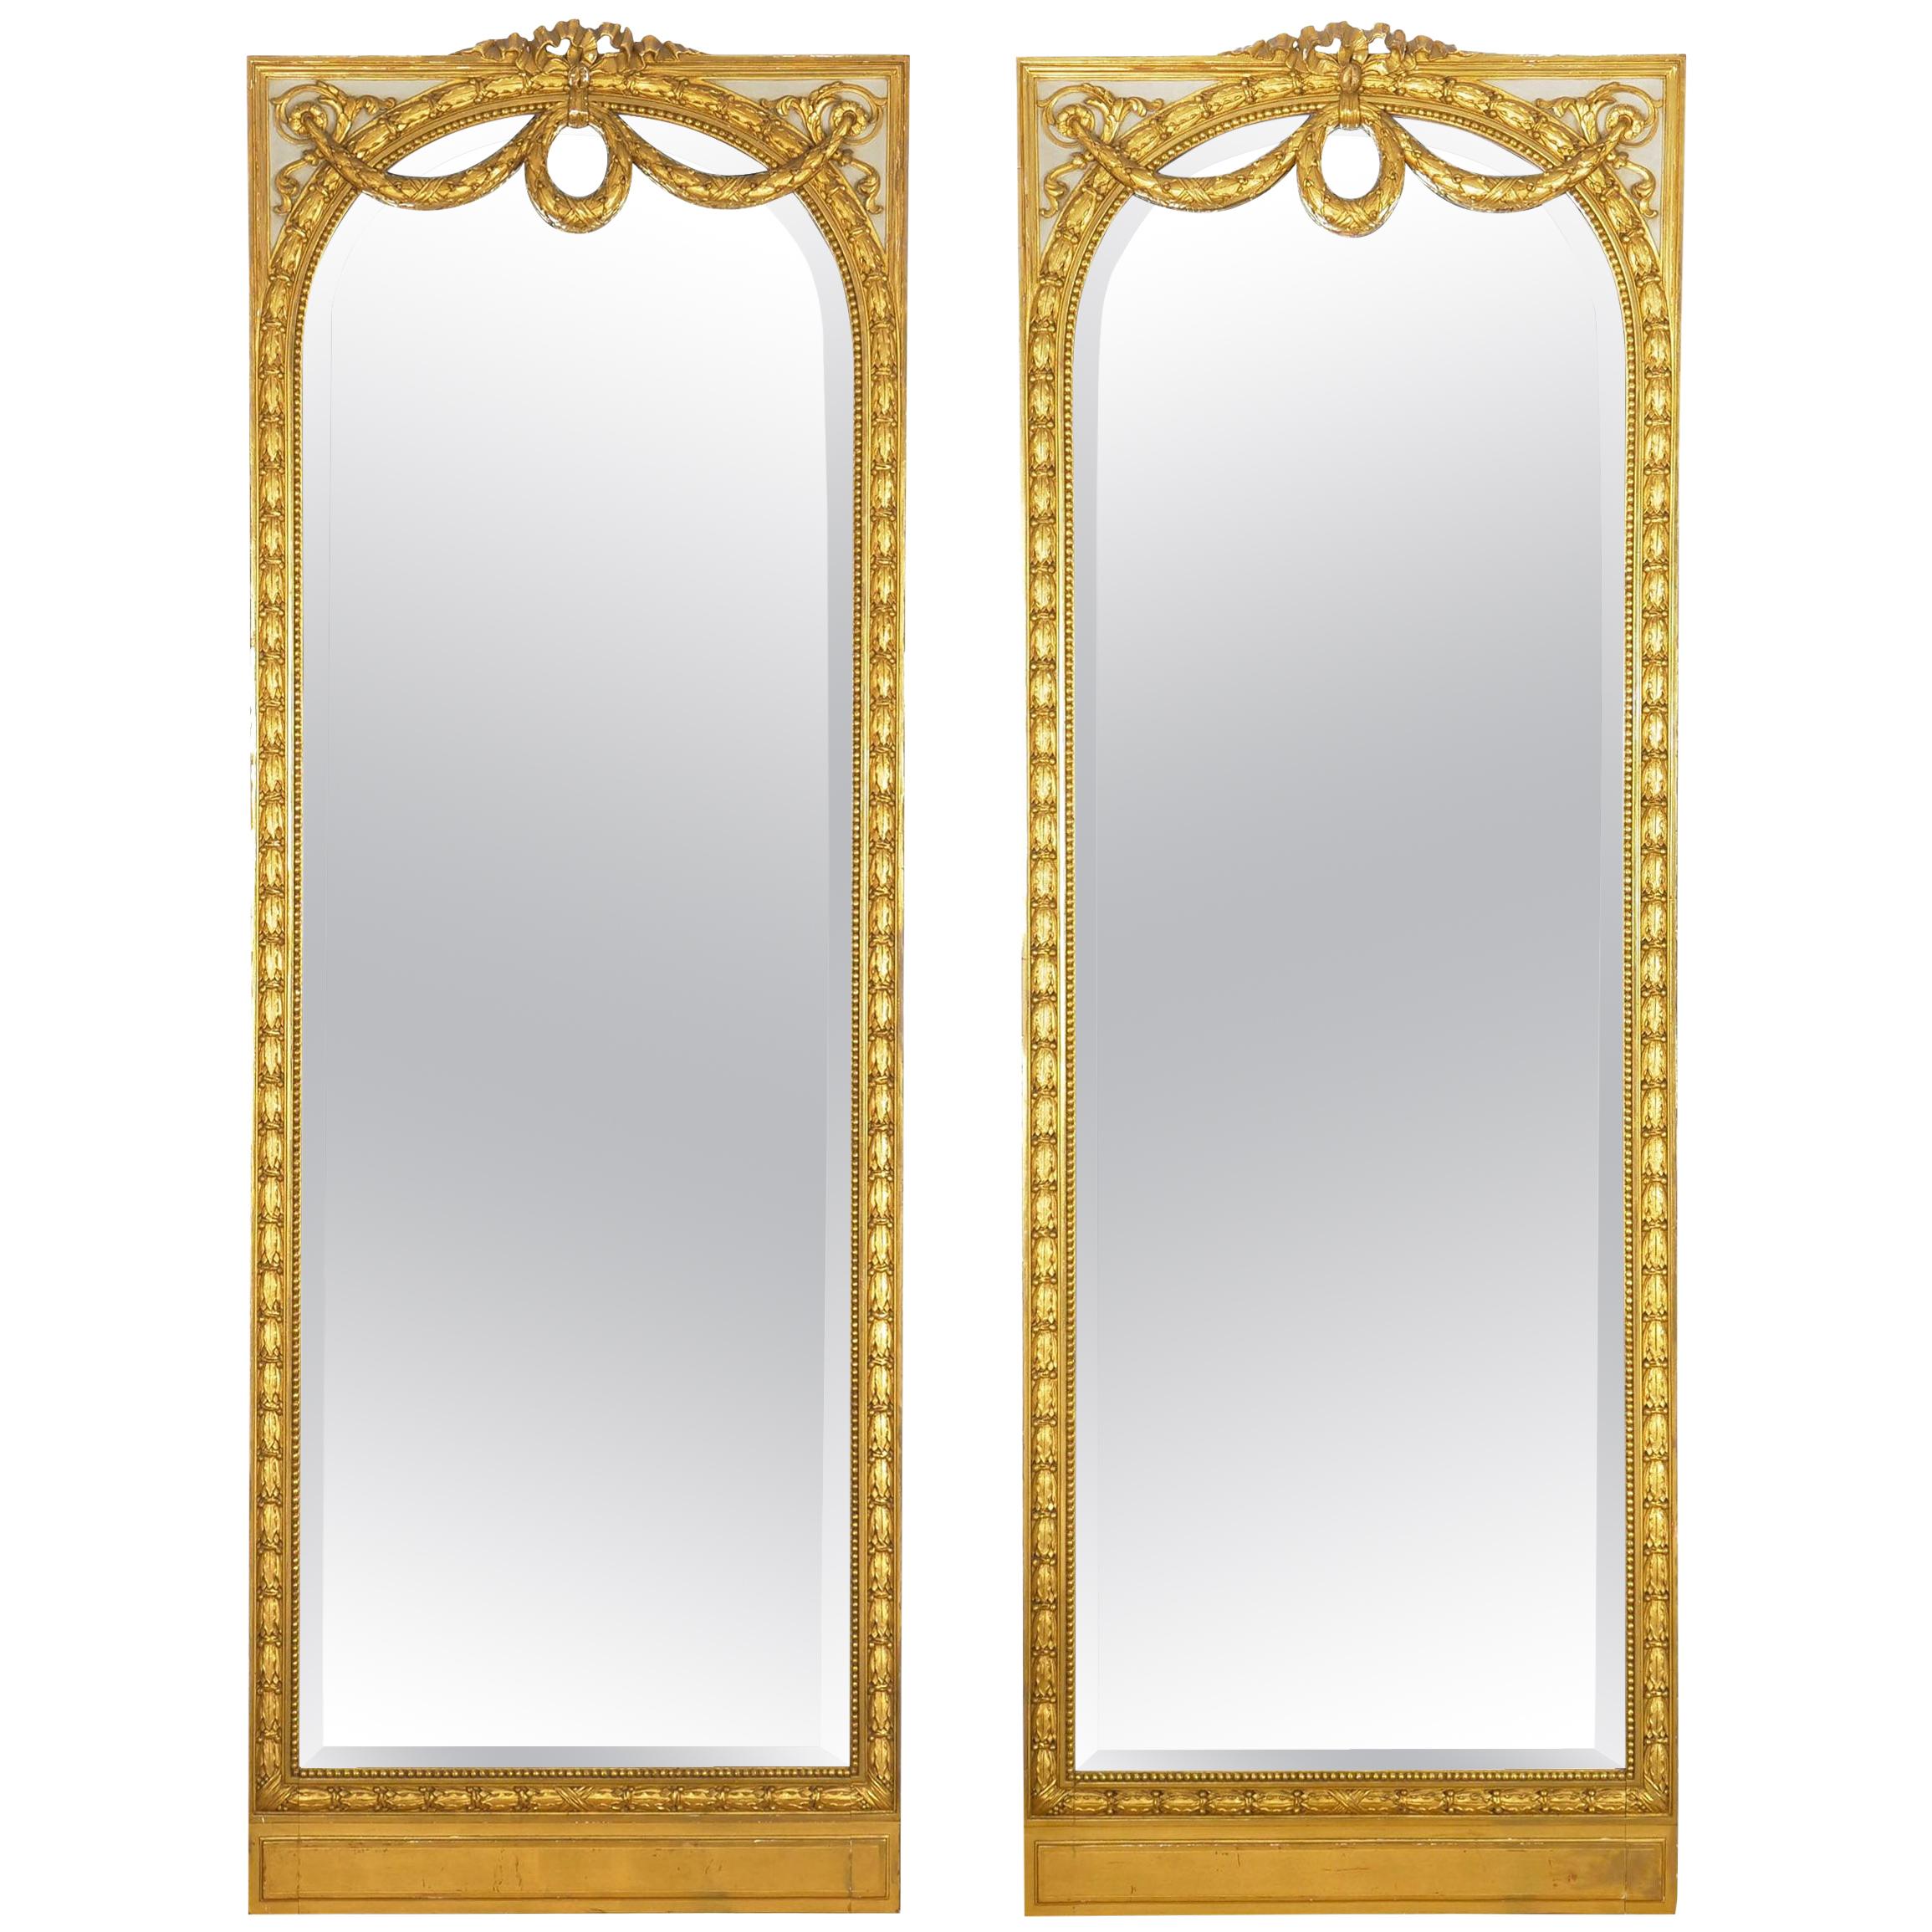 Pair of French Louis XVI Style Antique Full-Length Mirrors, circa 1900